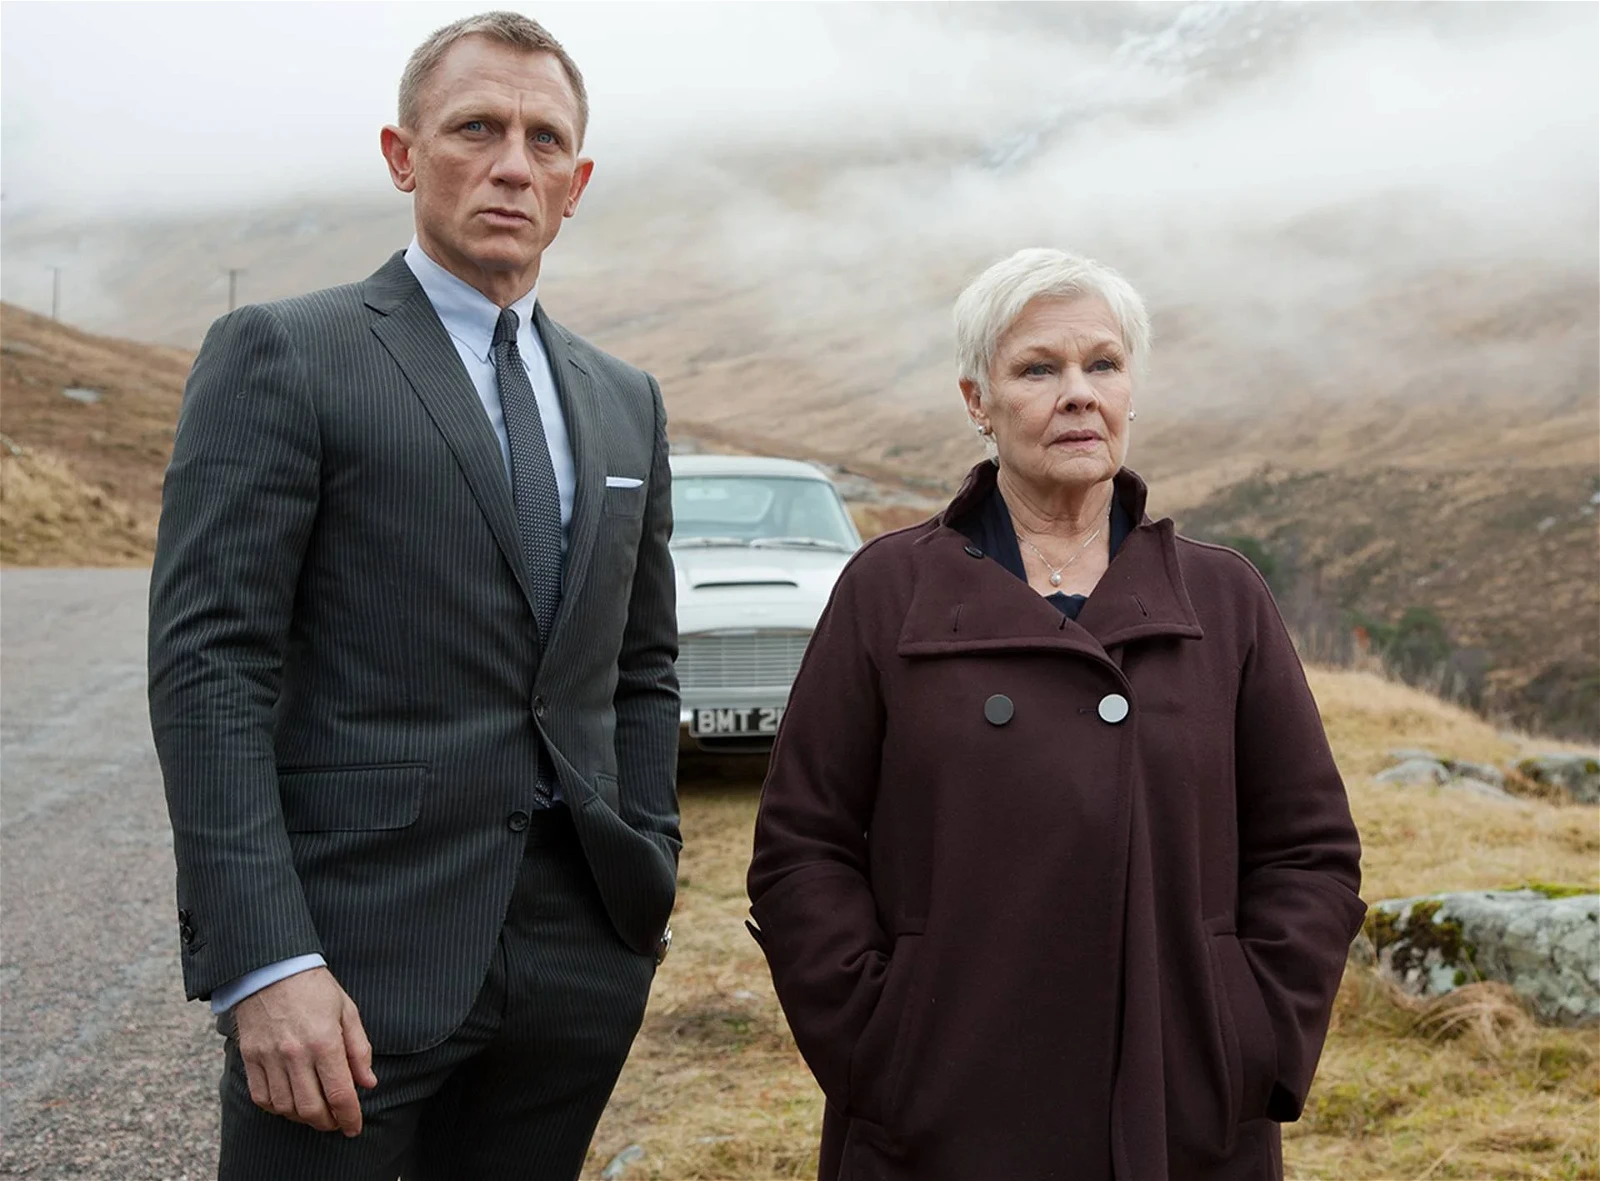 Dench with Daniel Craig in a still from the franchise